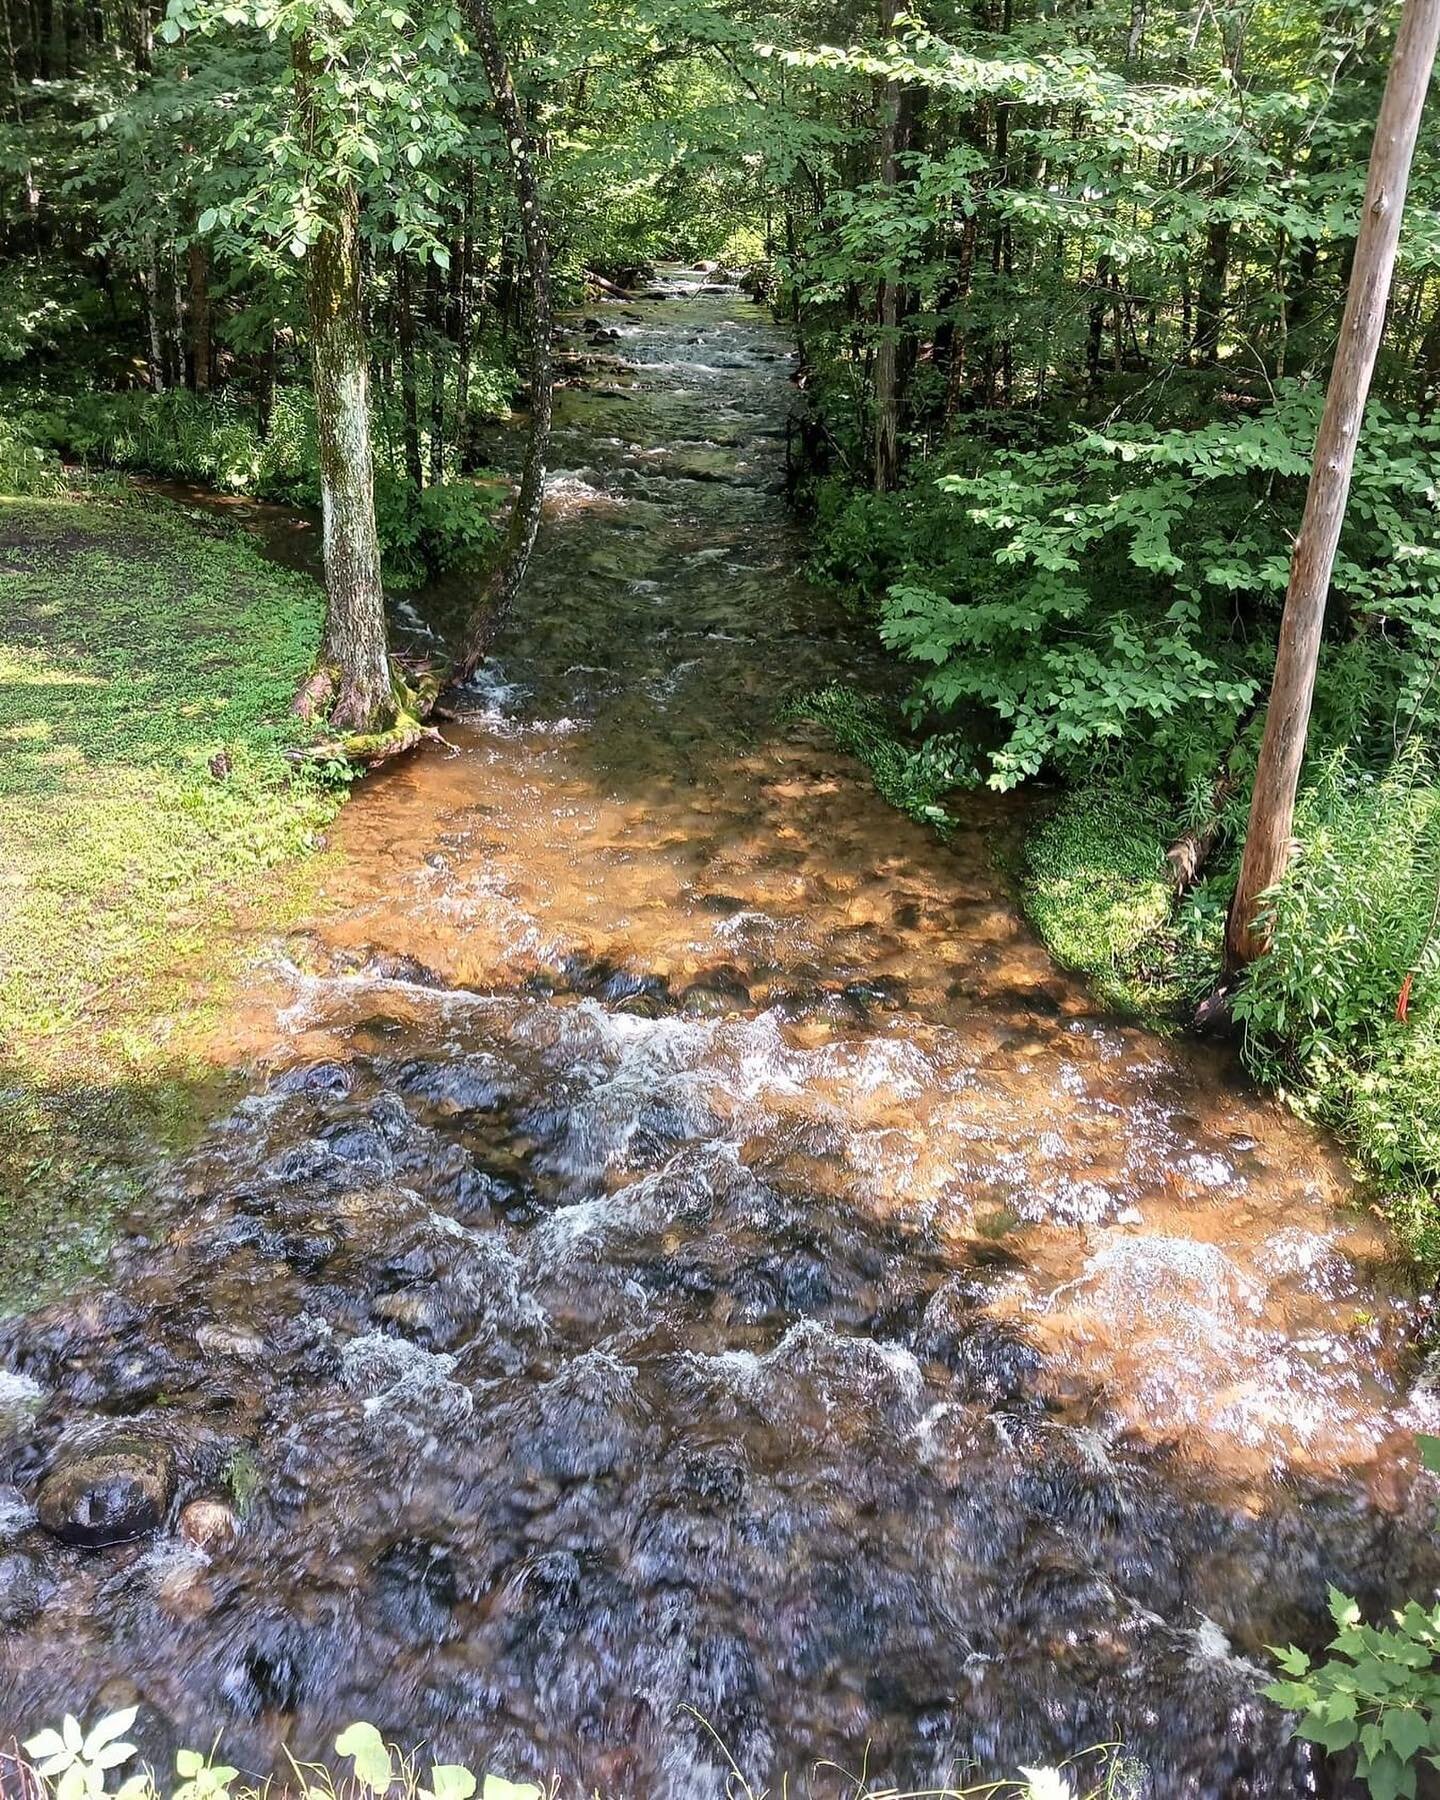 The Creek is moving but we are high and dry at the Fox Creek Inn. Book a stay with us at www.foxcreekinnvt.com. Hope to see you soon.